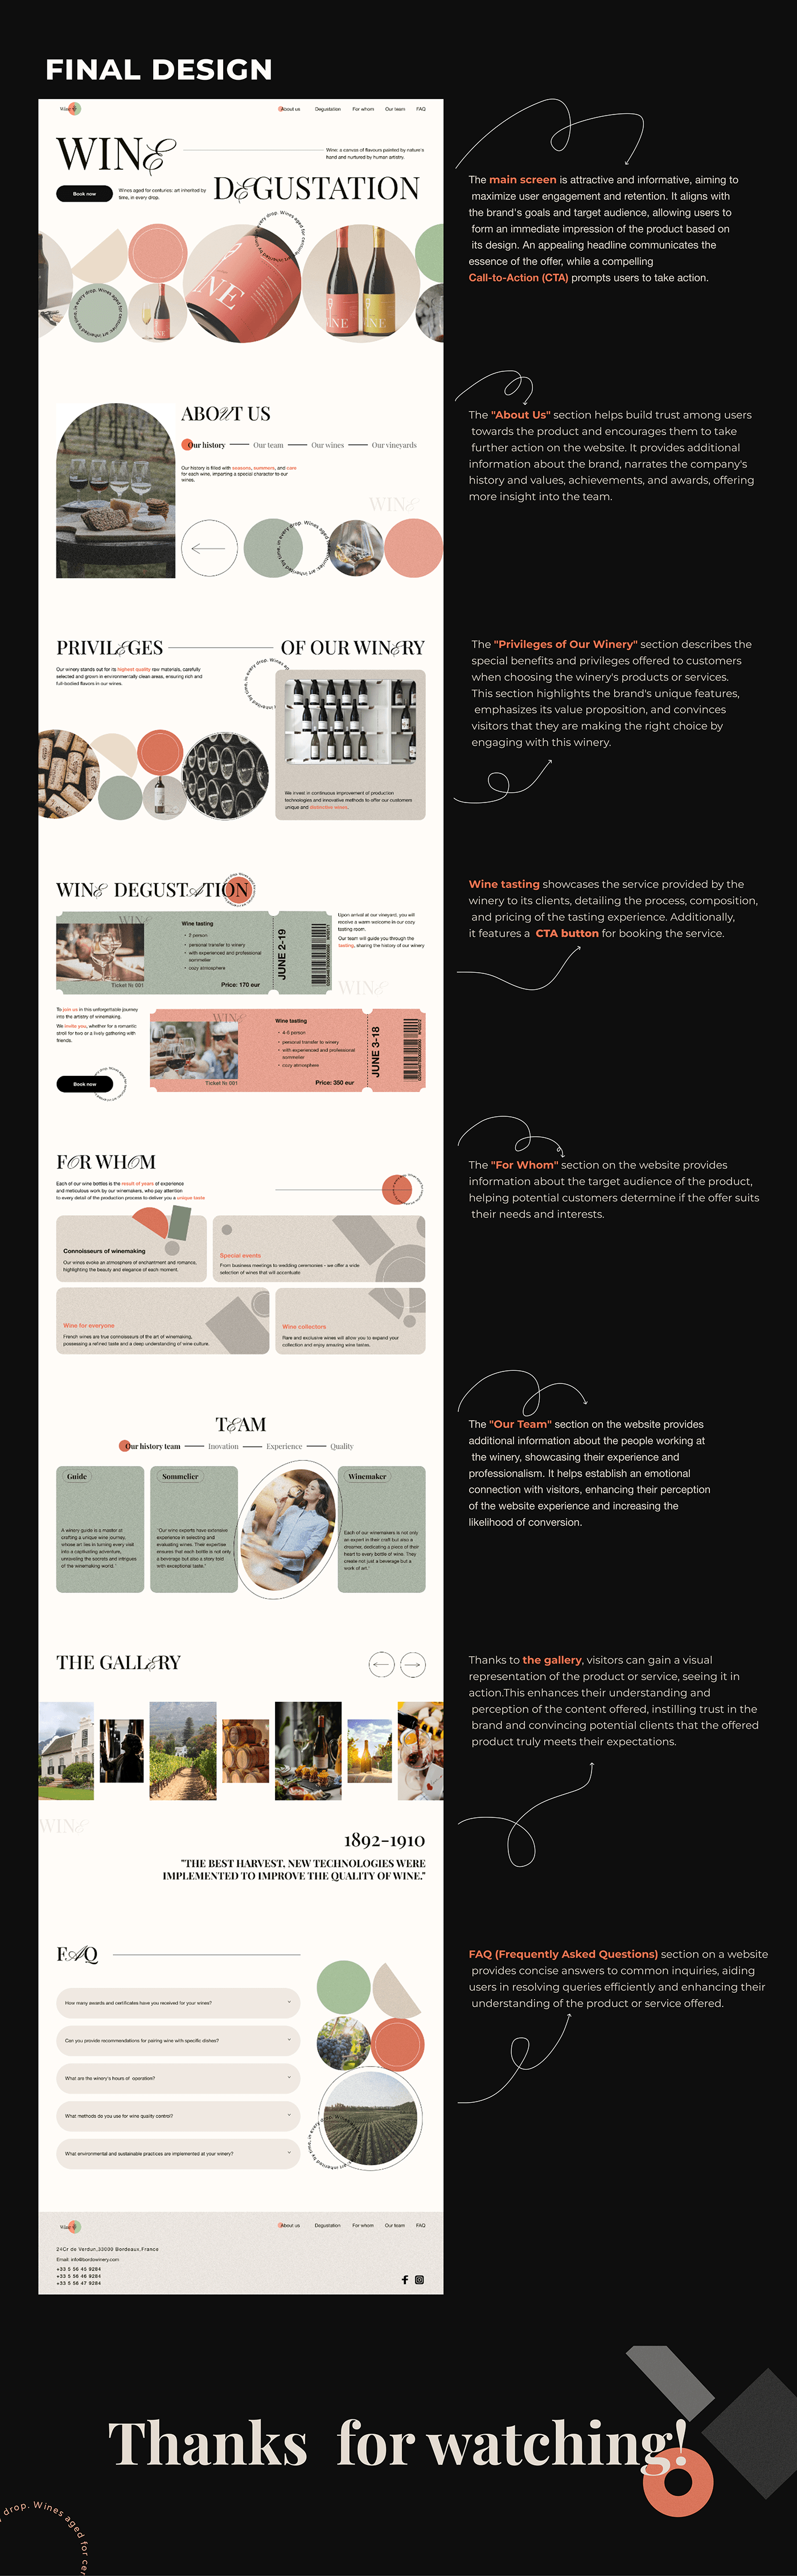 landing page ux/ui Figma user interface UX design Winery wine label